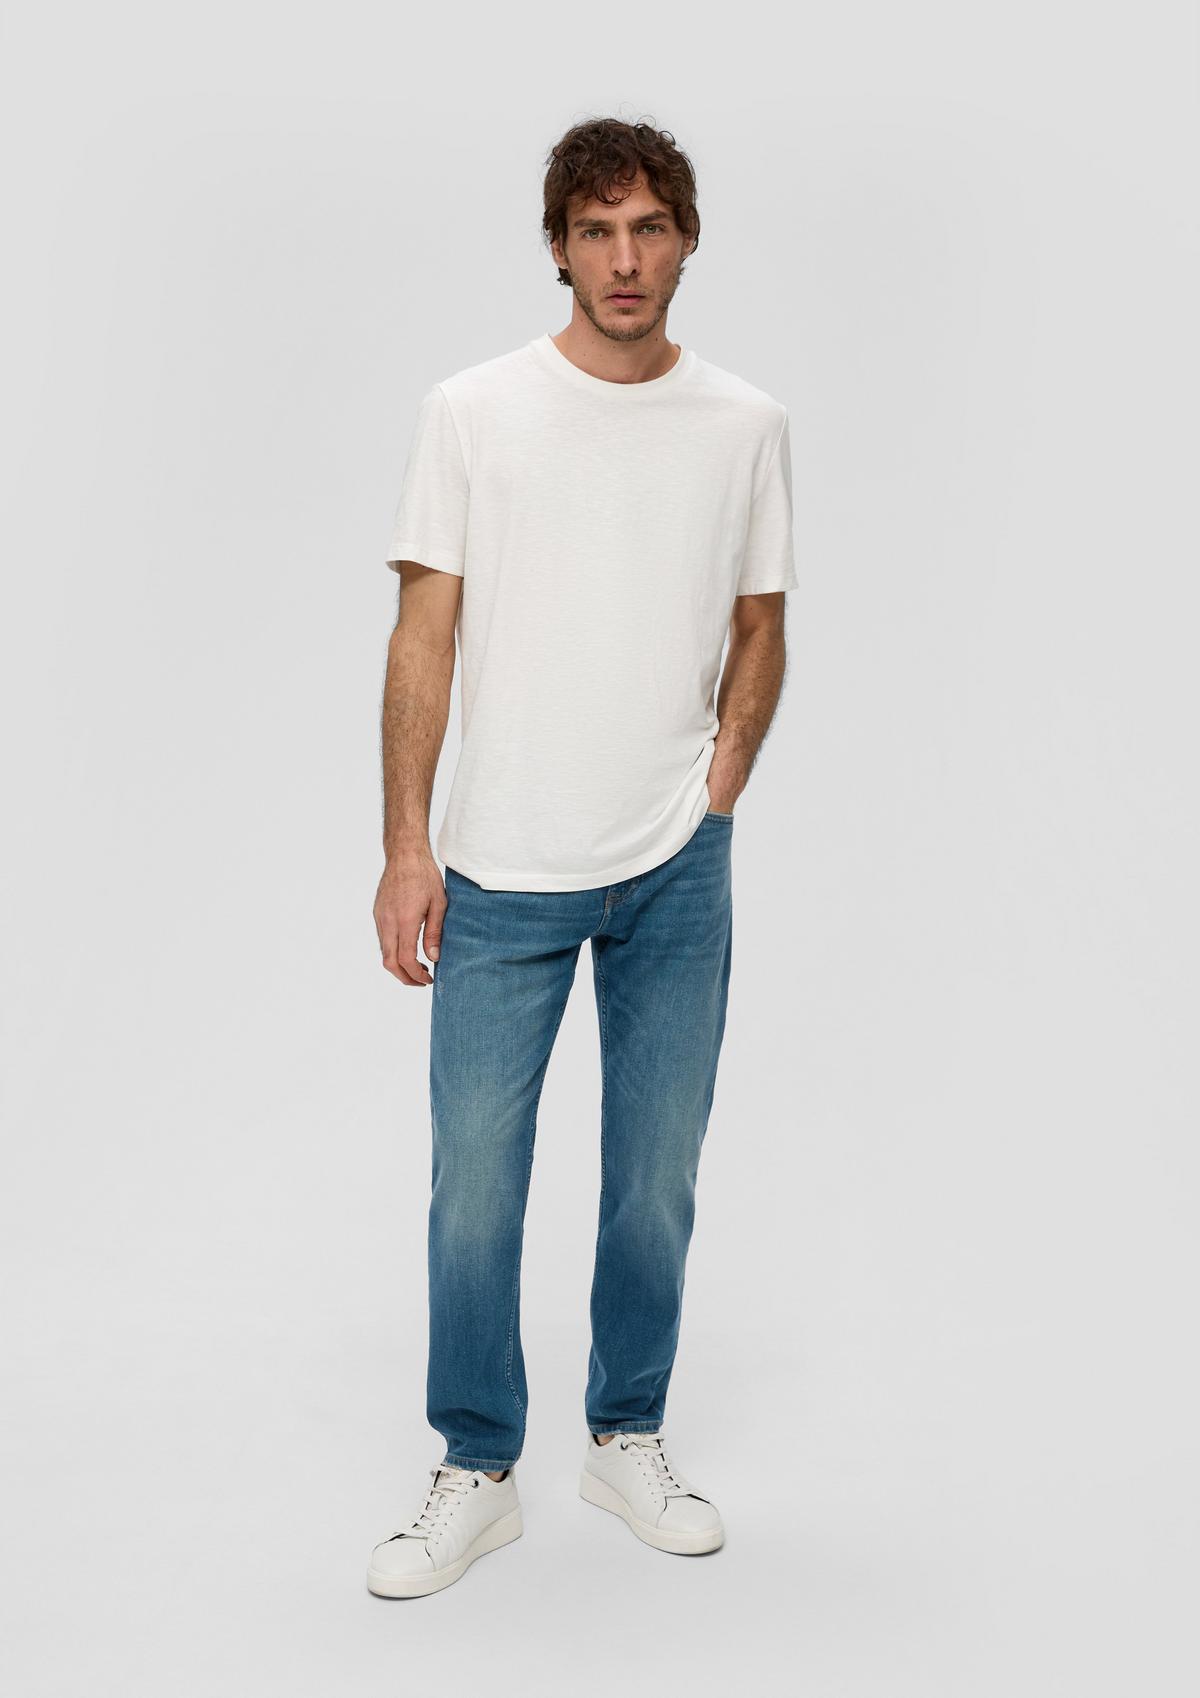 s.Oliver Jeans Mauro / Regular Fit / Hight Waist / Tapered Leg